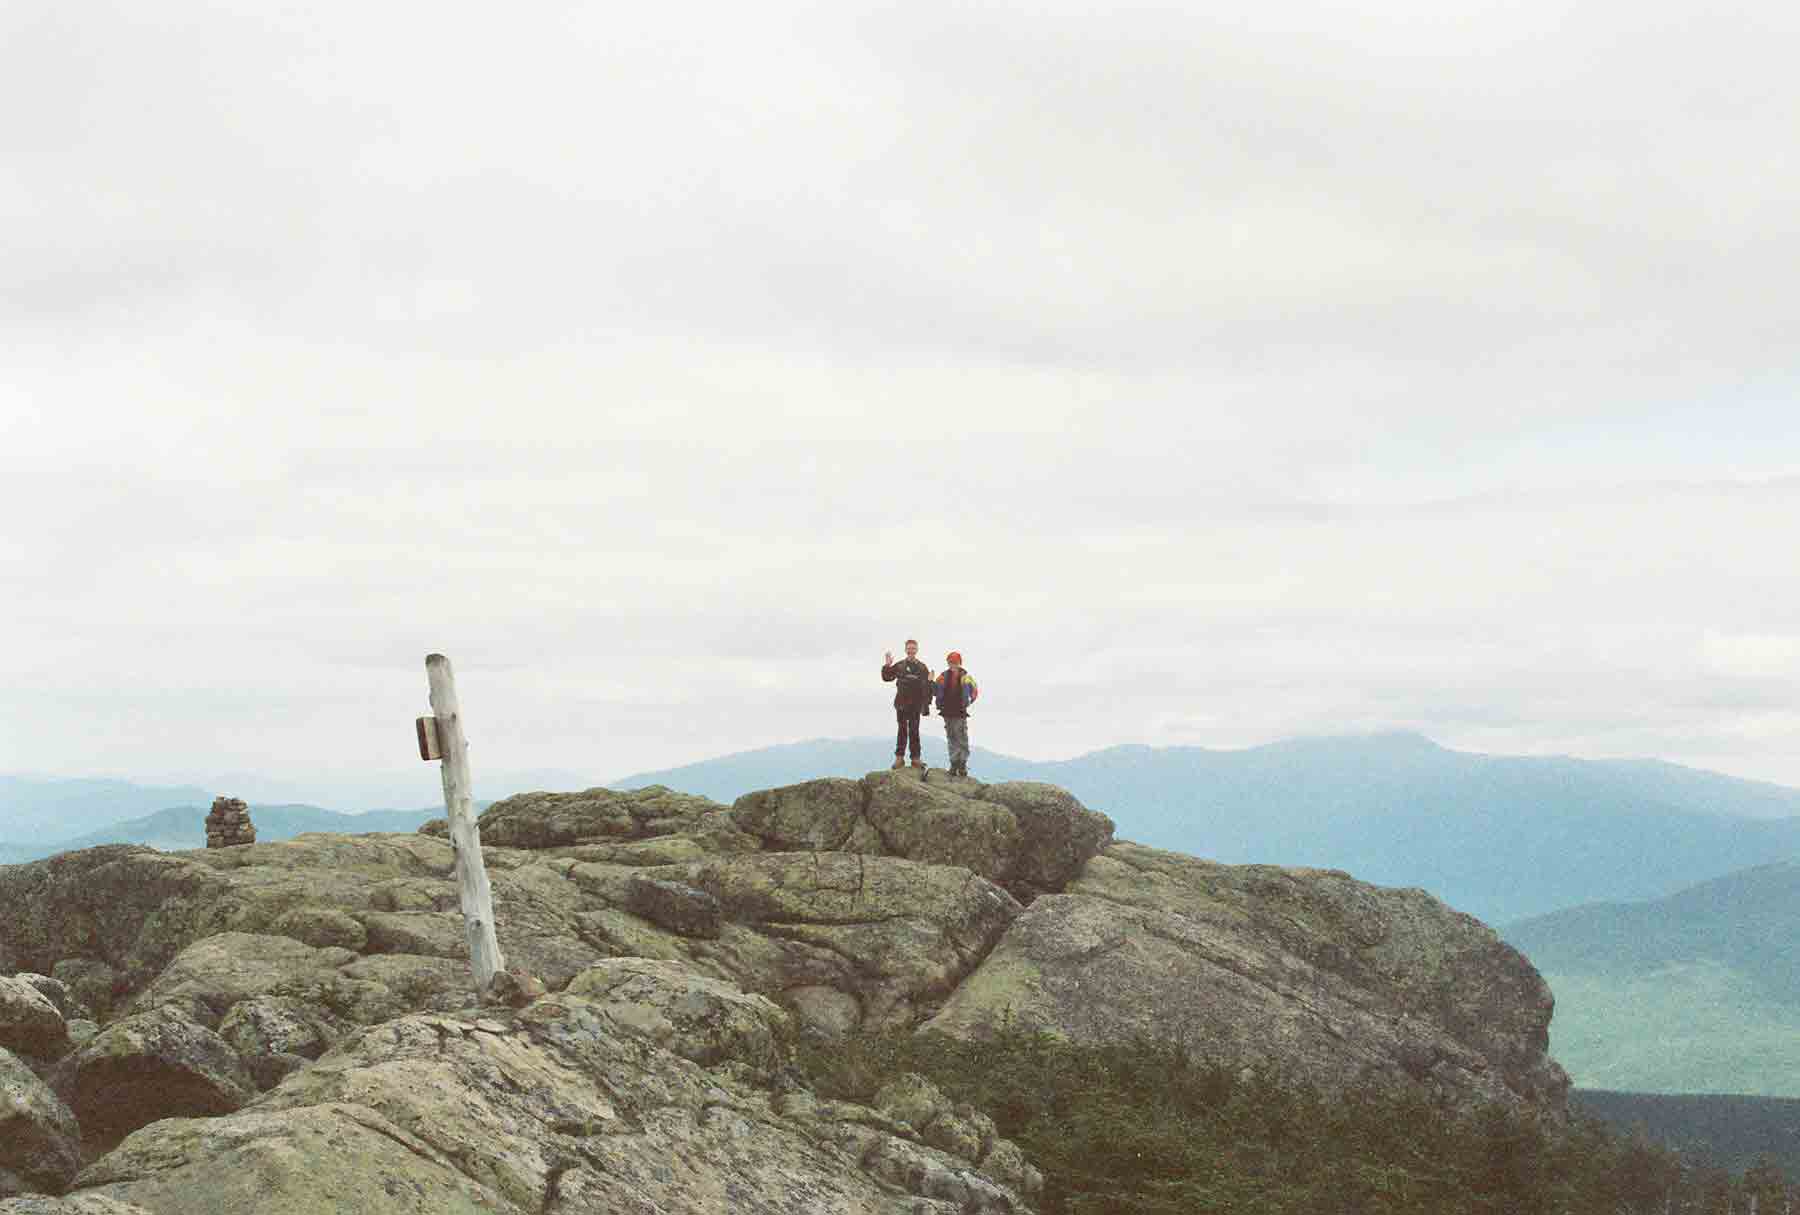 mm 13. 9 - Summit of South Twin Mt.  Mt. Washington and the Presidential Range are in the background.  Courtesy dlcul@conncoll.edu